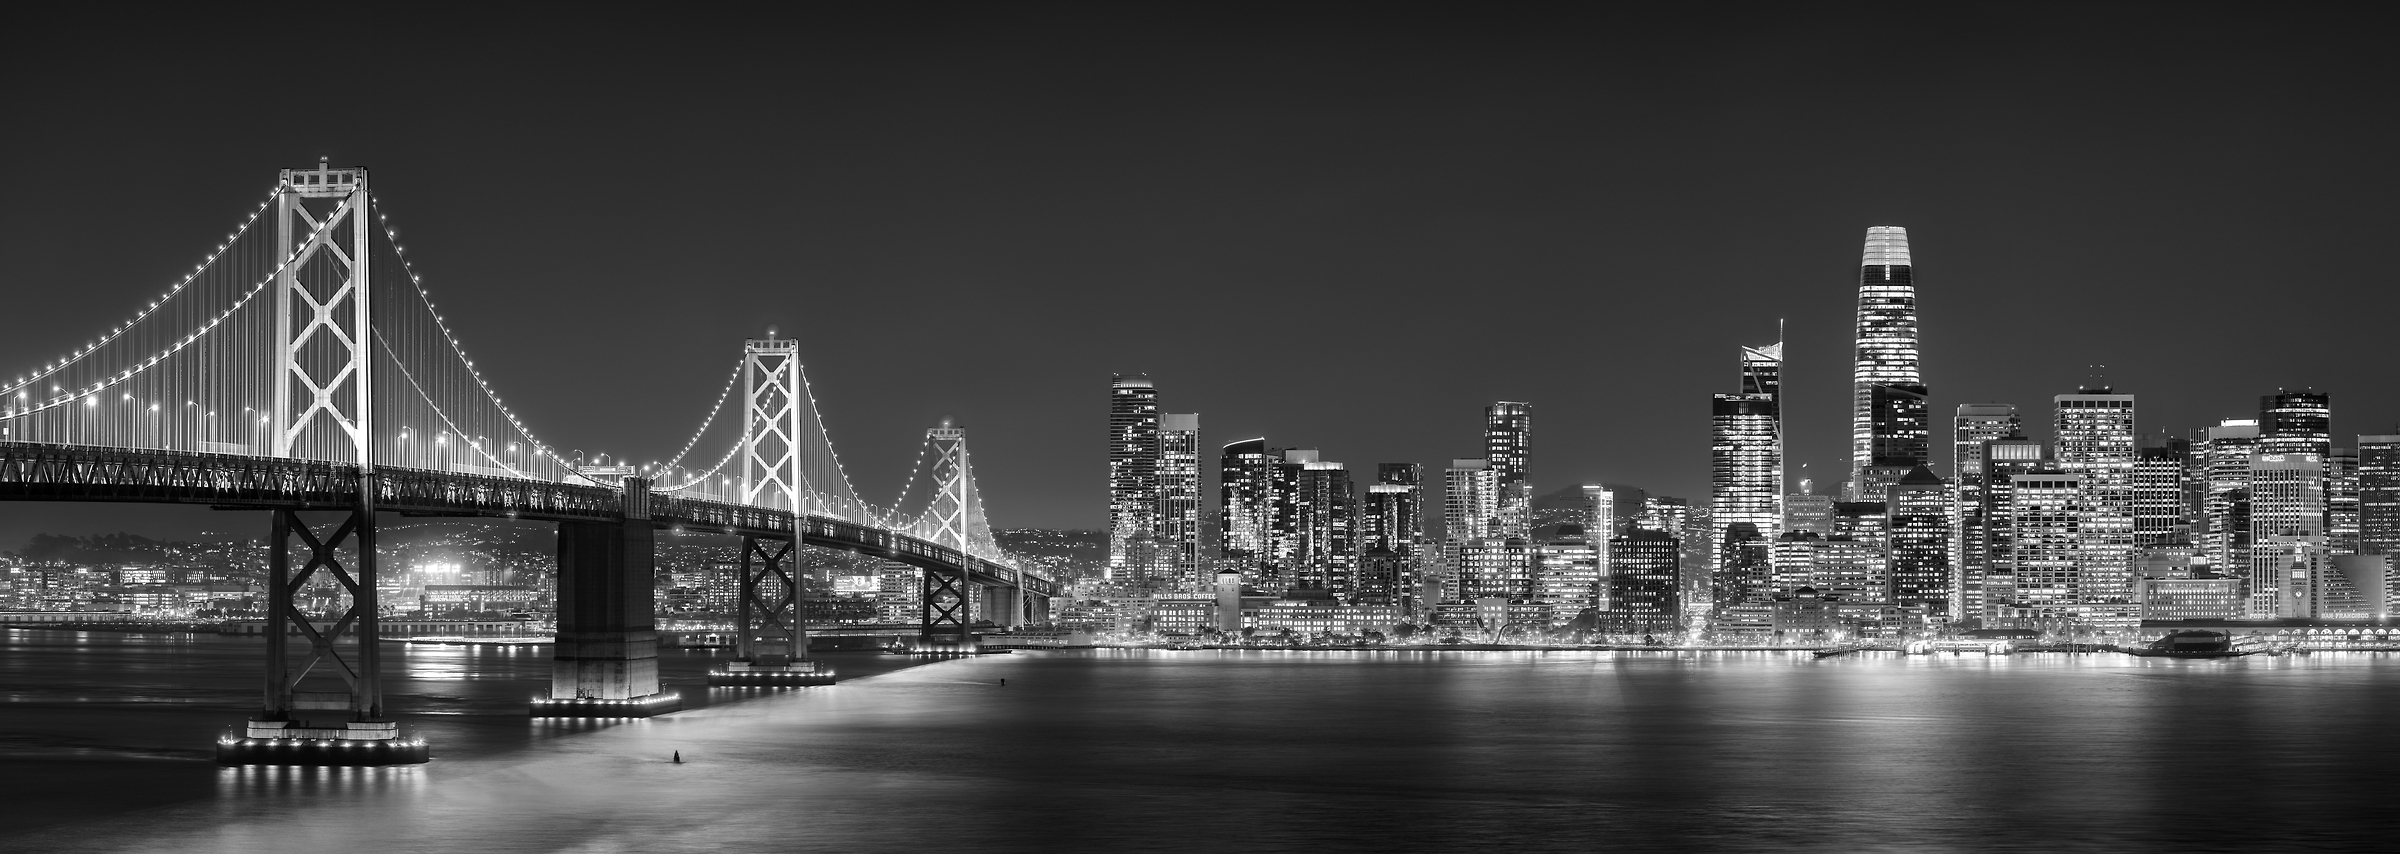 480 megapixels! A very high resolution, large-format VAST photo print of the San Francisco skyline and Bay Bridge at night; black & white cityscape skyline photograph created by Jim Tarpo in Yerba Buena Island and Treasure Island, San Francisco, California